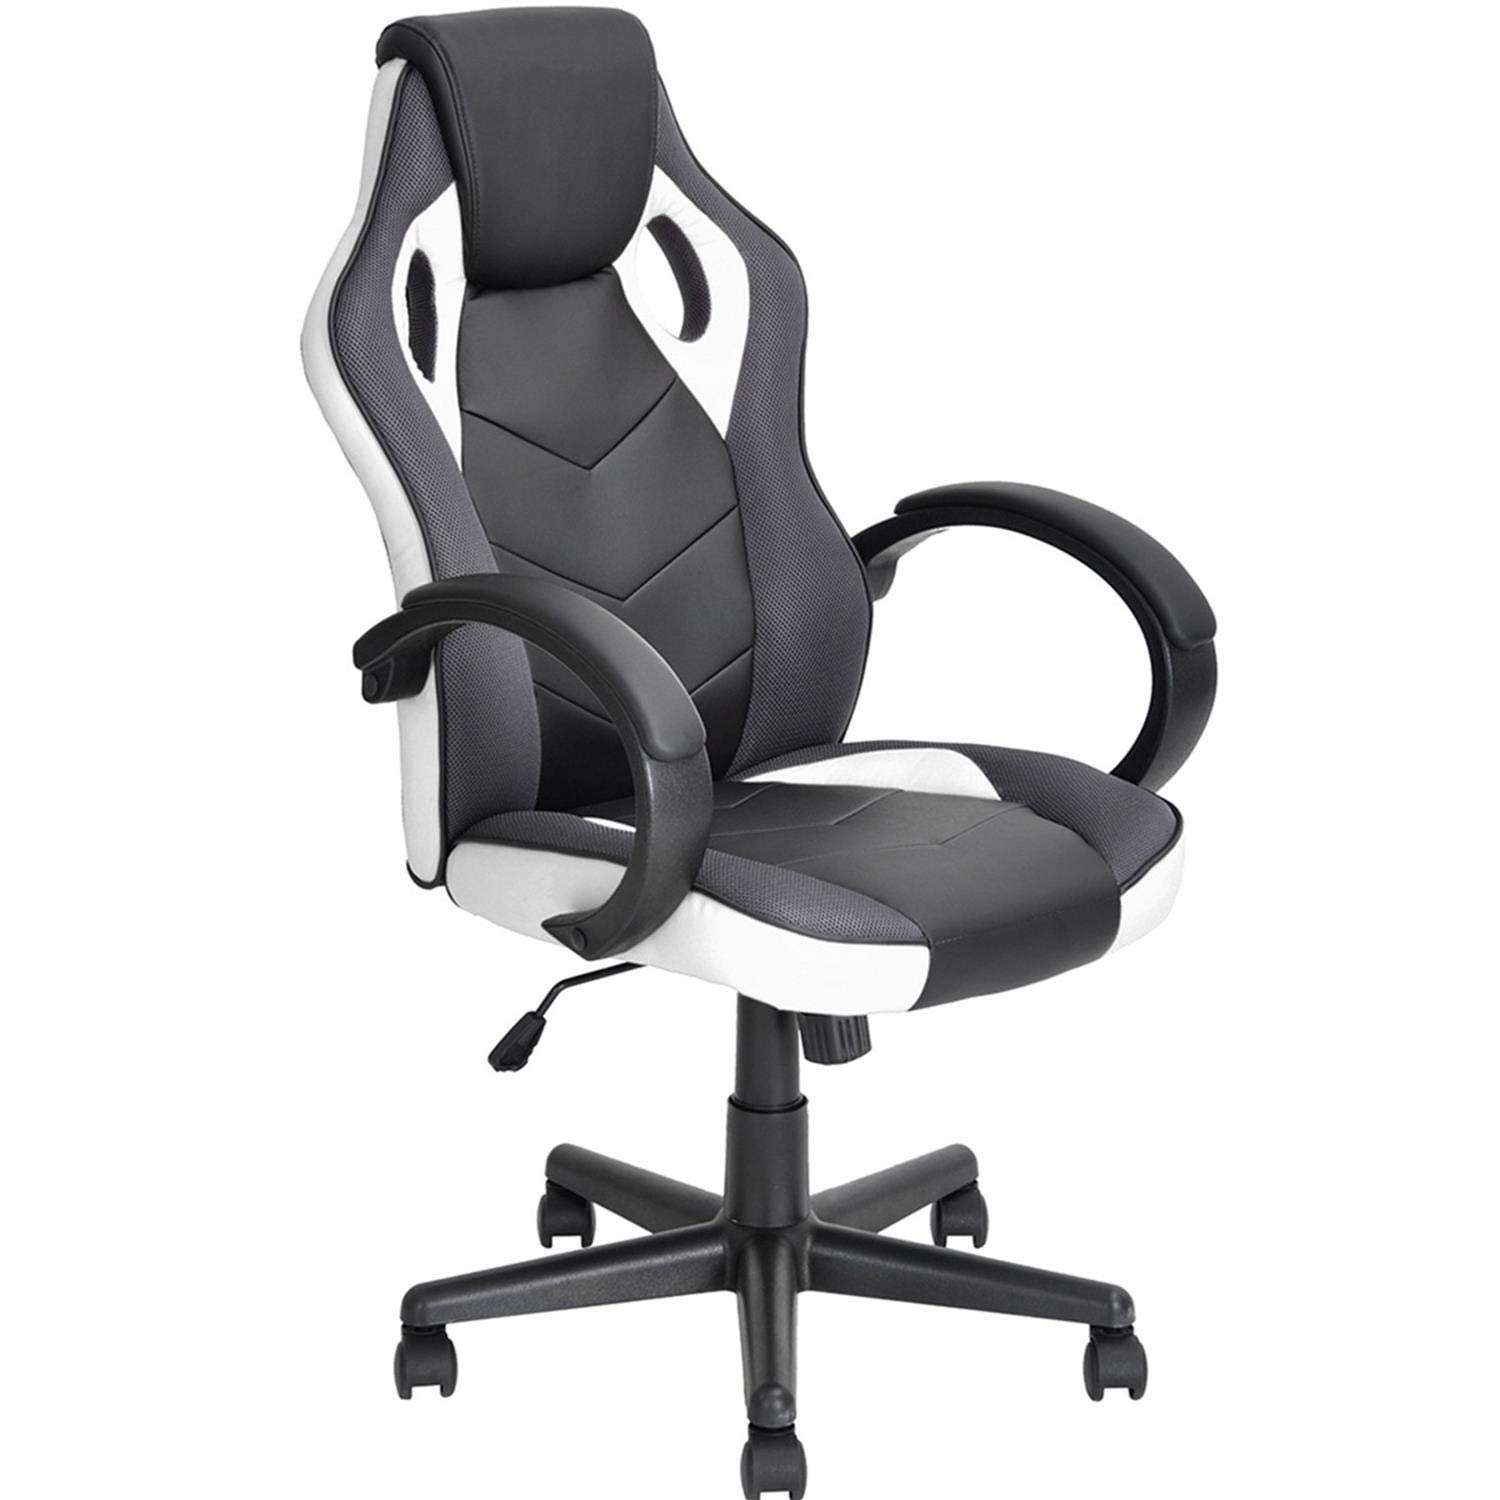 Coavas PU Leather High Back Office Gaming Racing